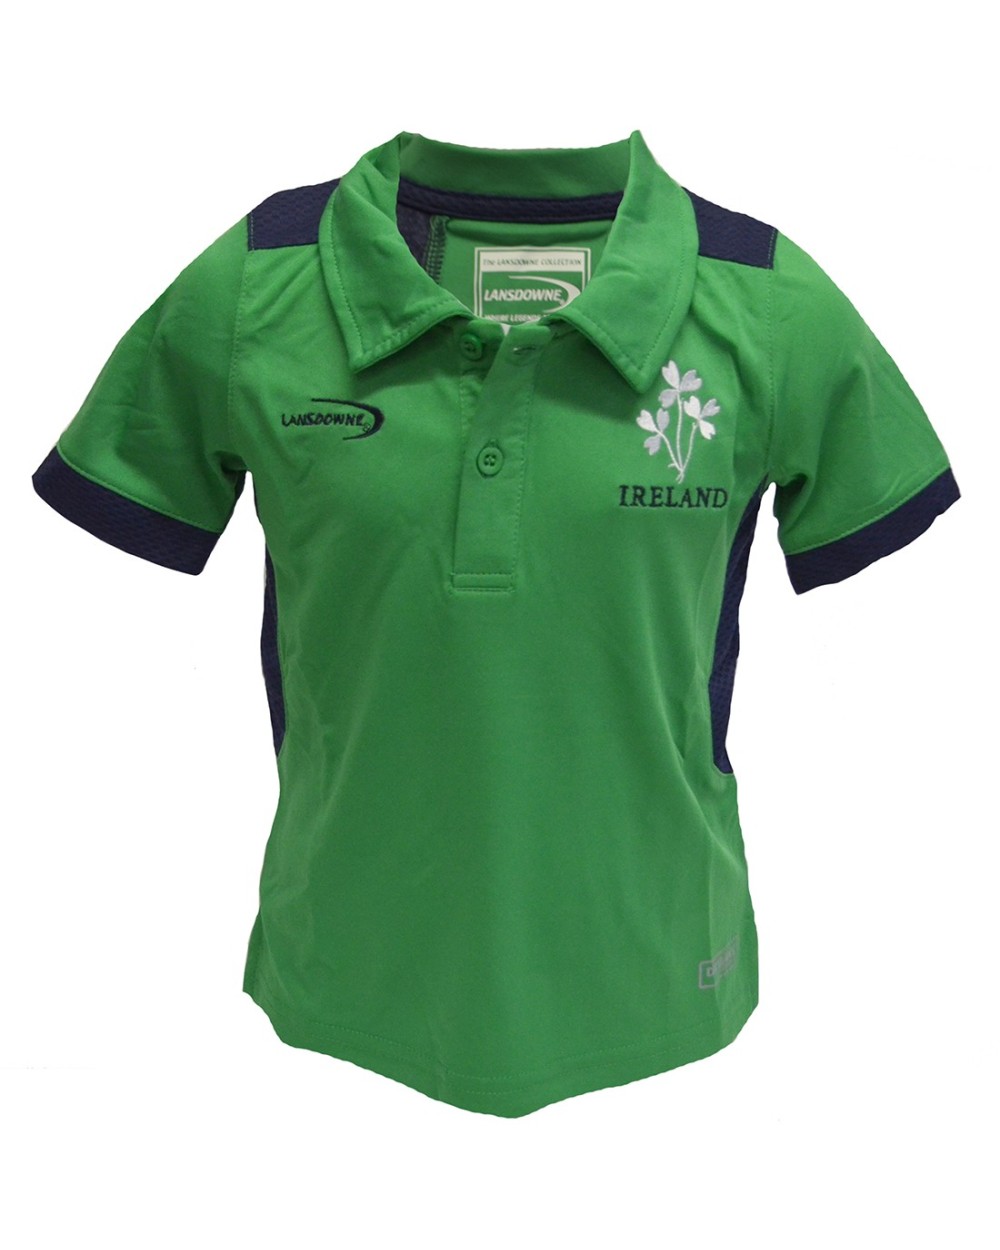 Lansdowne Sports Official Collection Emerald Green And Navy Performance Kids Polo Shirt